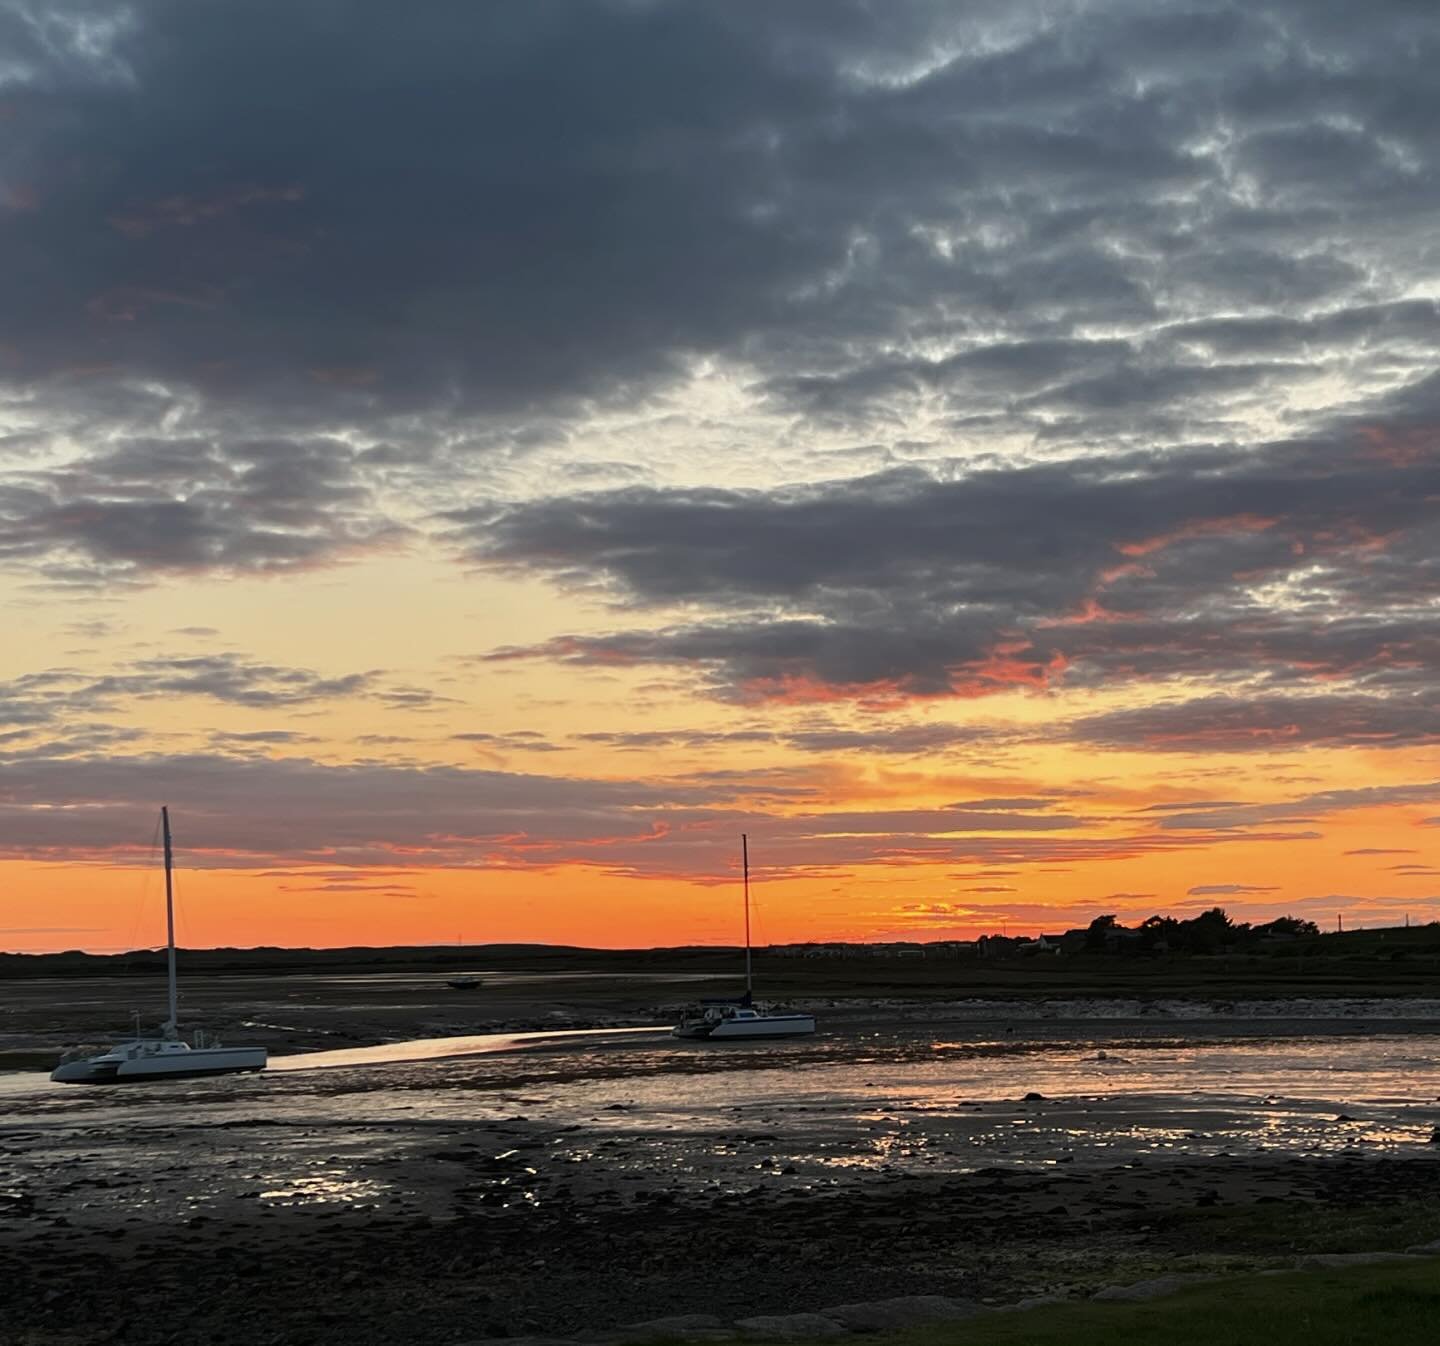 A picturesque sunset in Ravenglass, UK from our hotel room, the next picture a beautiful sunset on our last day in Amsterdam from our hotel room. The rest of the pictures are from Ravenglass, looking out to the Irish Sea- really where three rivers me